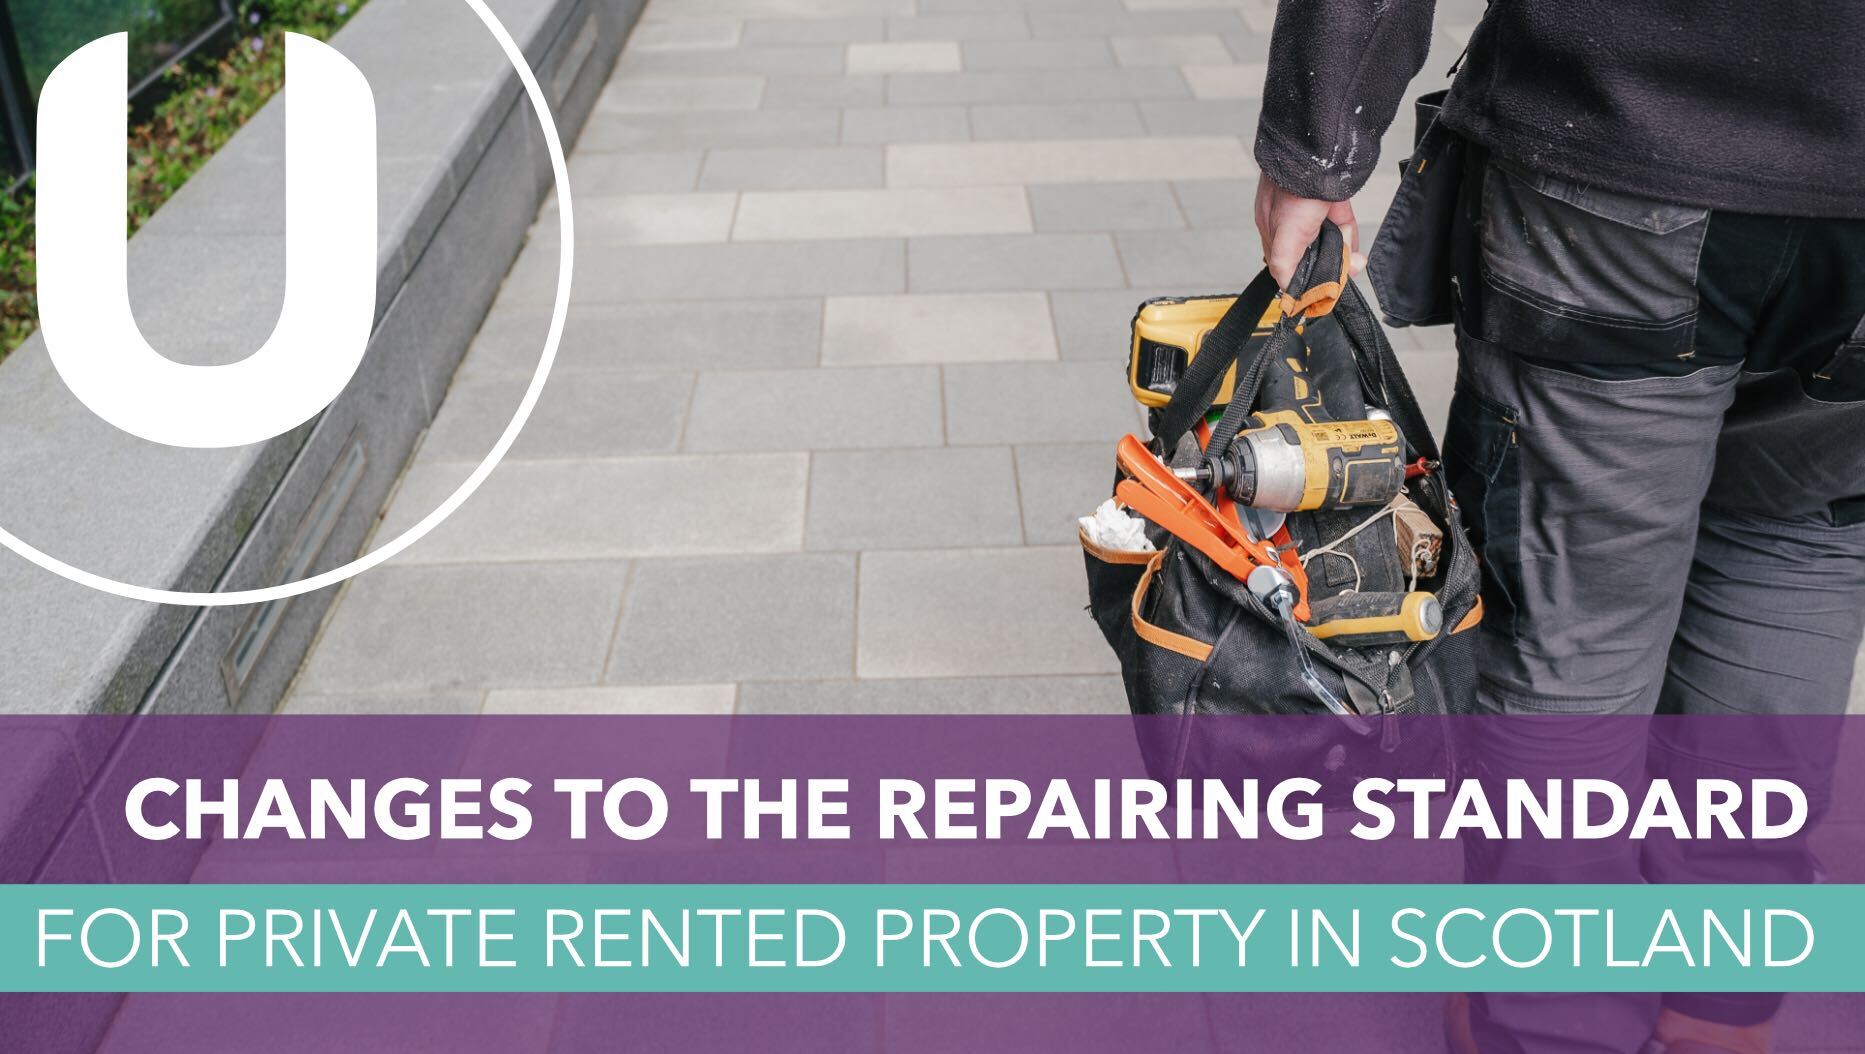 Changes to the Repairing Standard that covers private rented property in Scotland